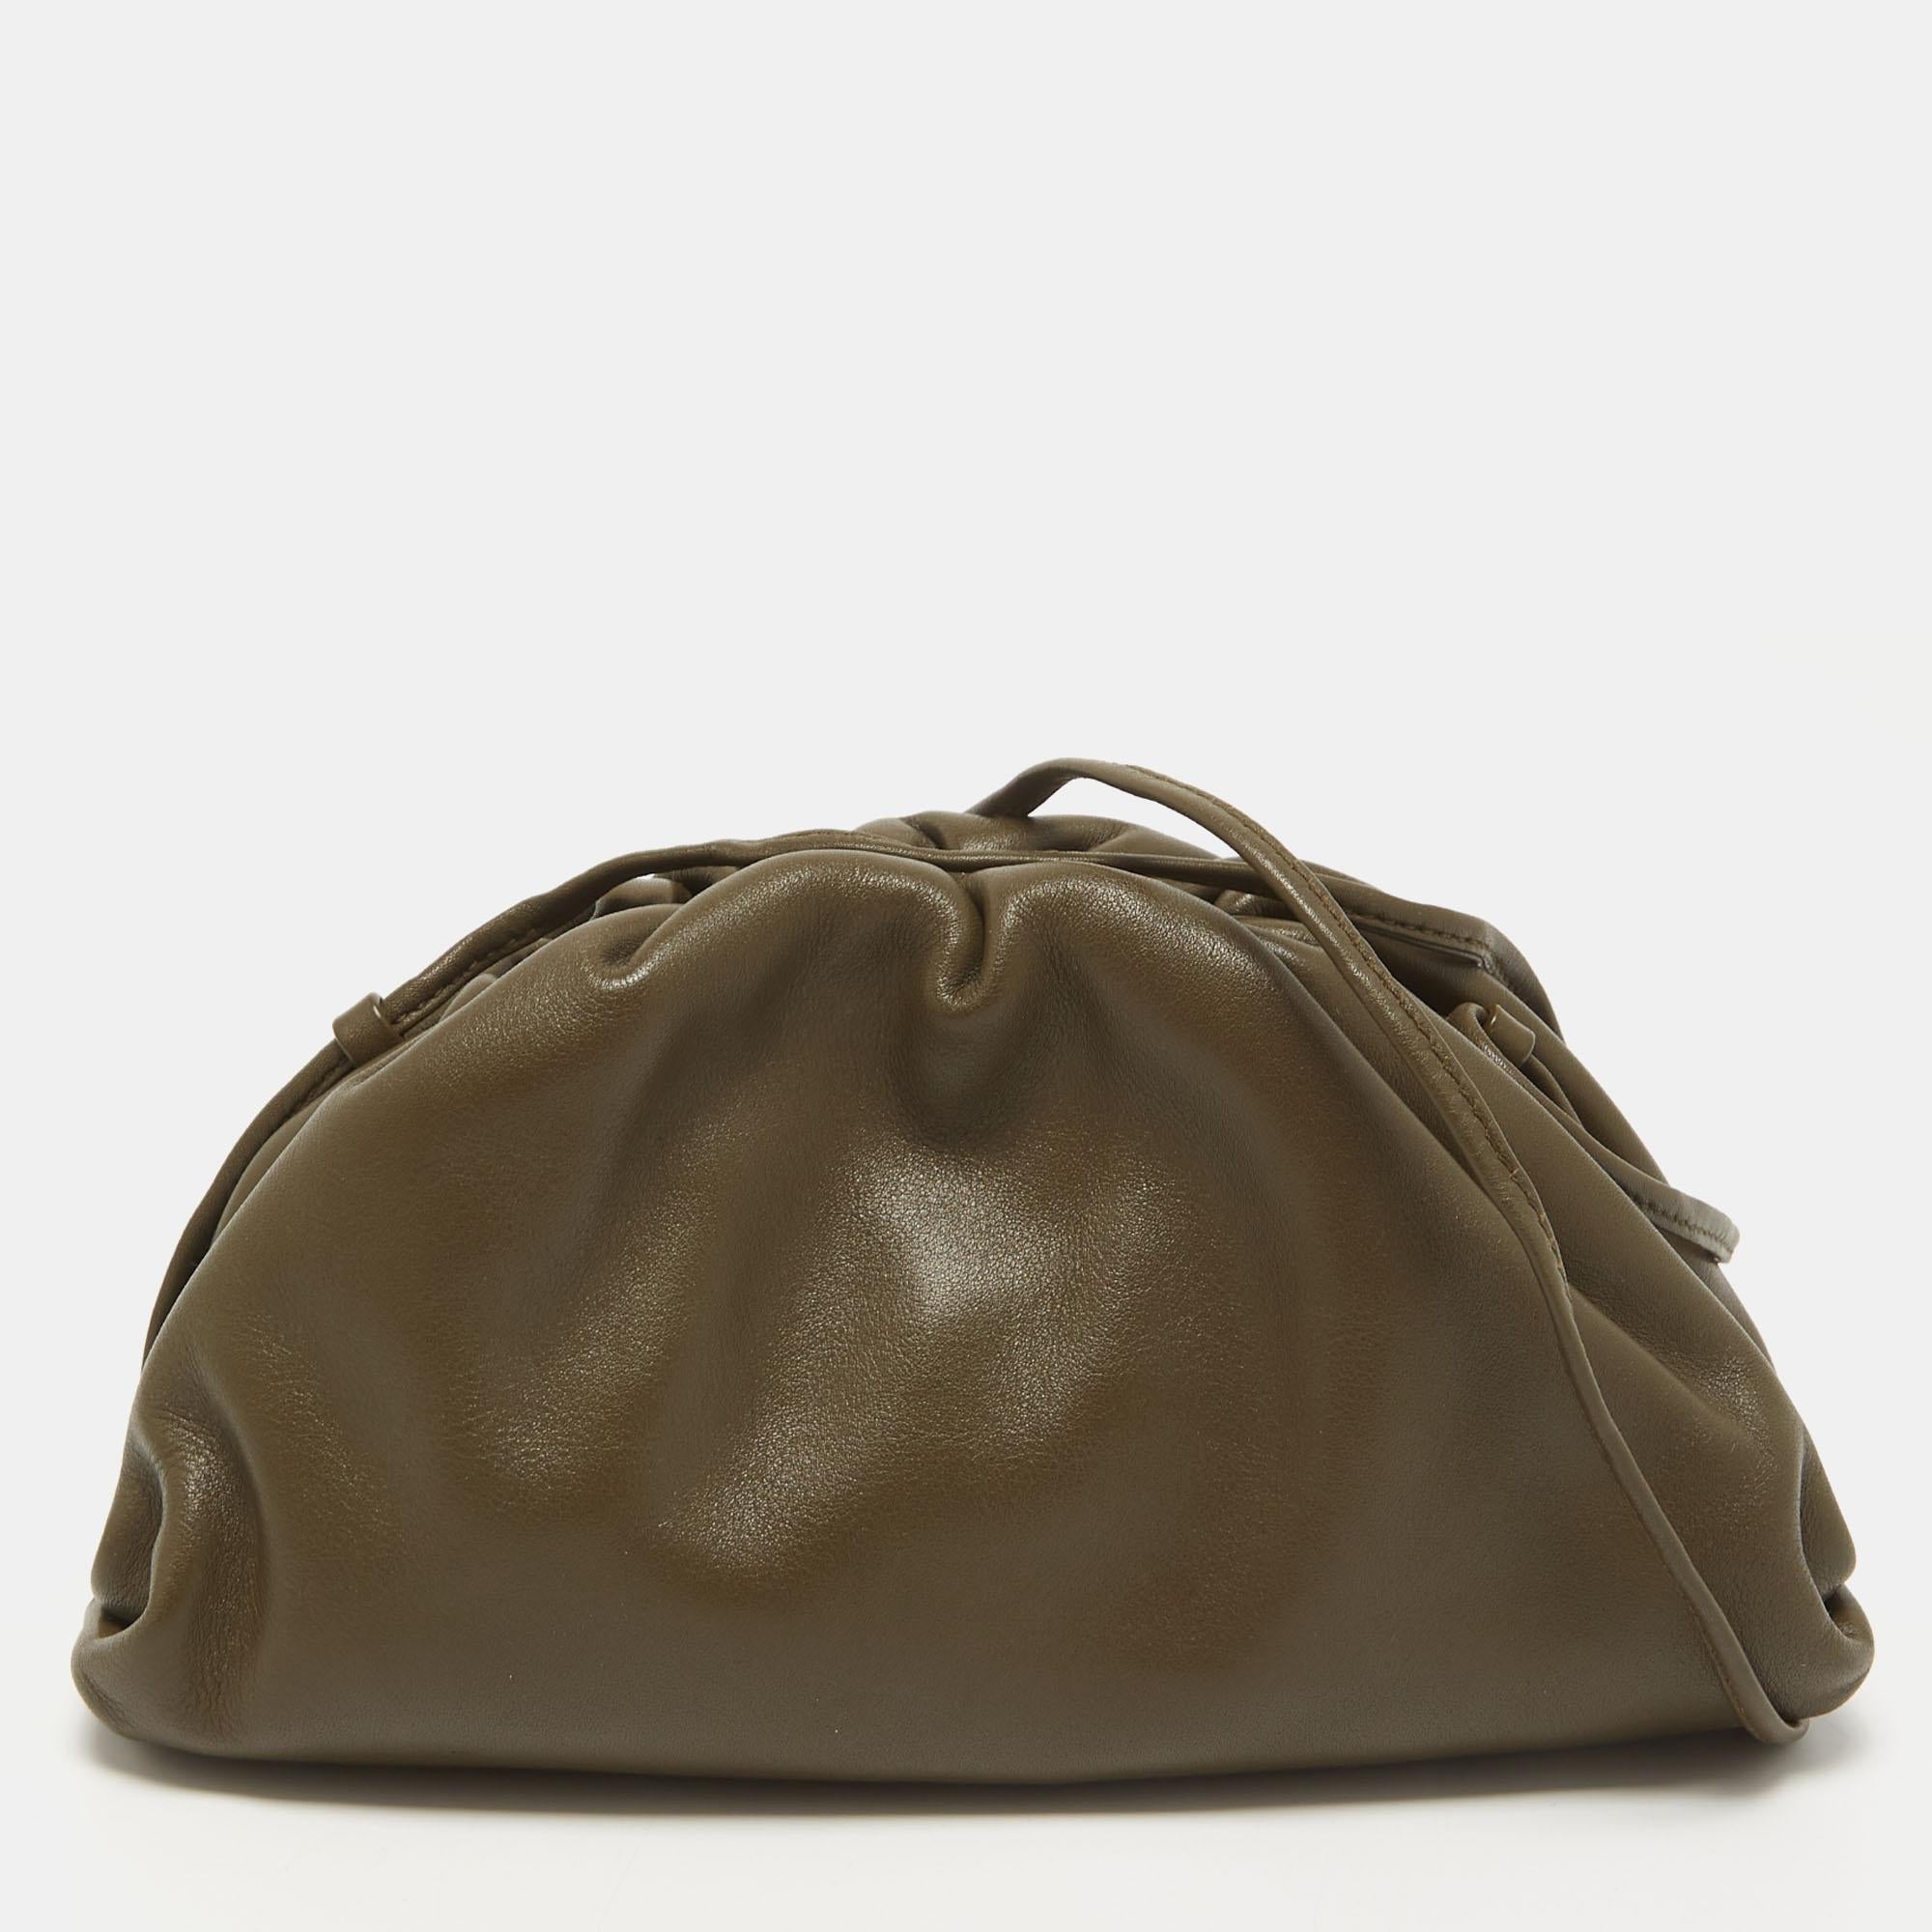 In line with Bottega Veneta's DNA, Daniel Lee opted for clean lines and a timeless appeal during his stint as Creative Director. This mini Pouch bag is made from supple leather that's gathered along the top. It has a slender shoulder strap so you